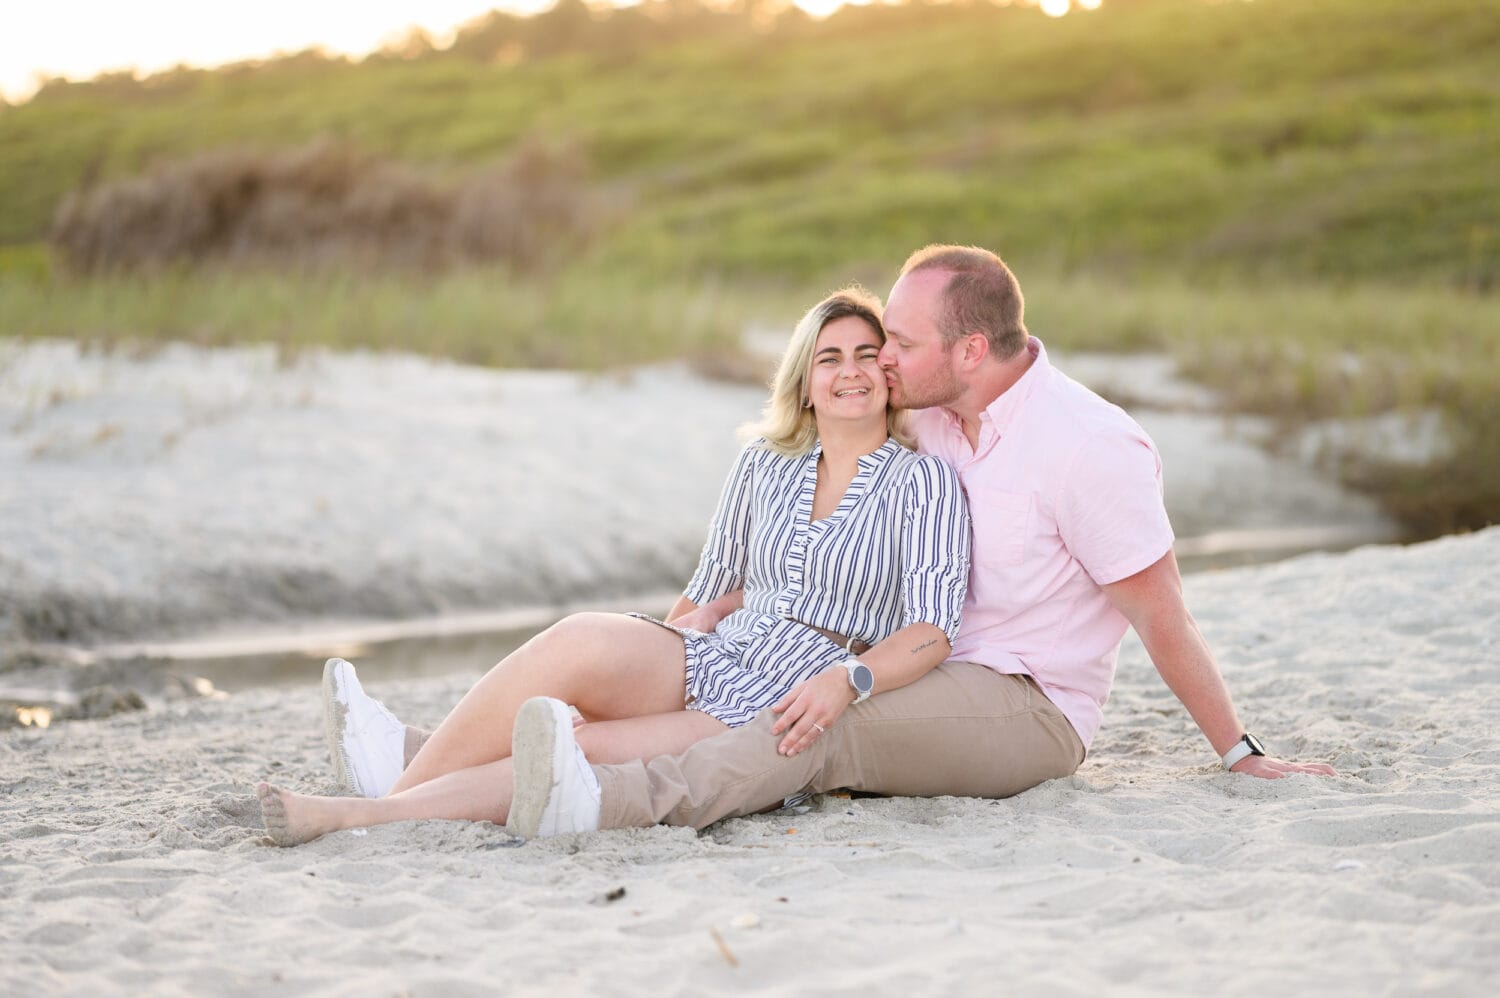 Engagement portraits by the ocean - Myrtle Beach State Park